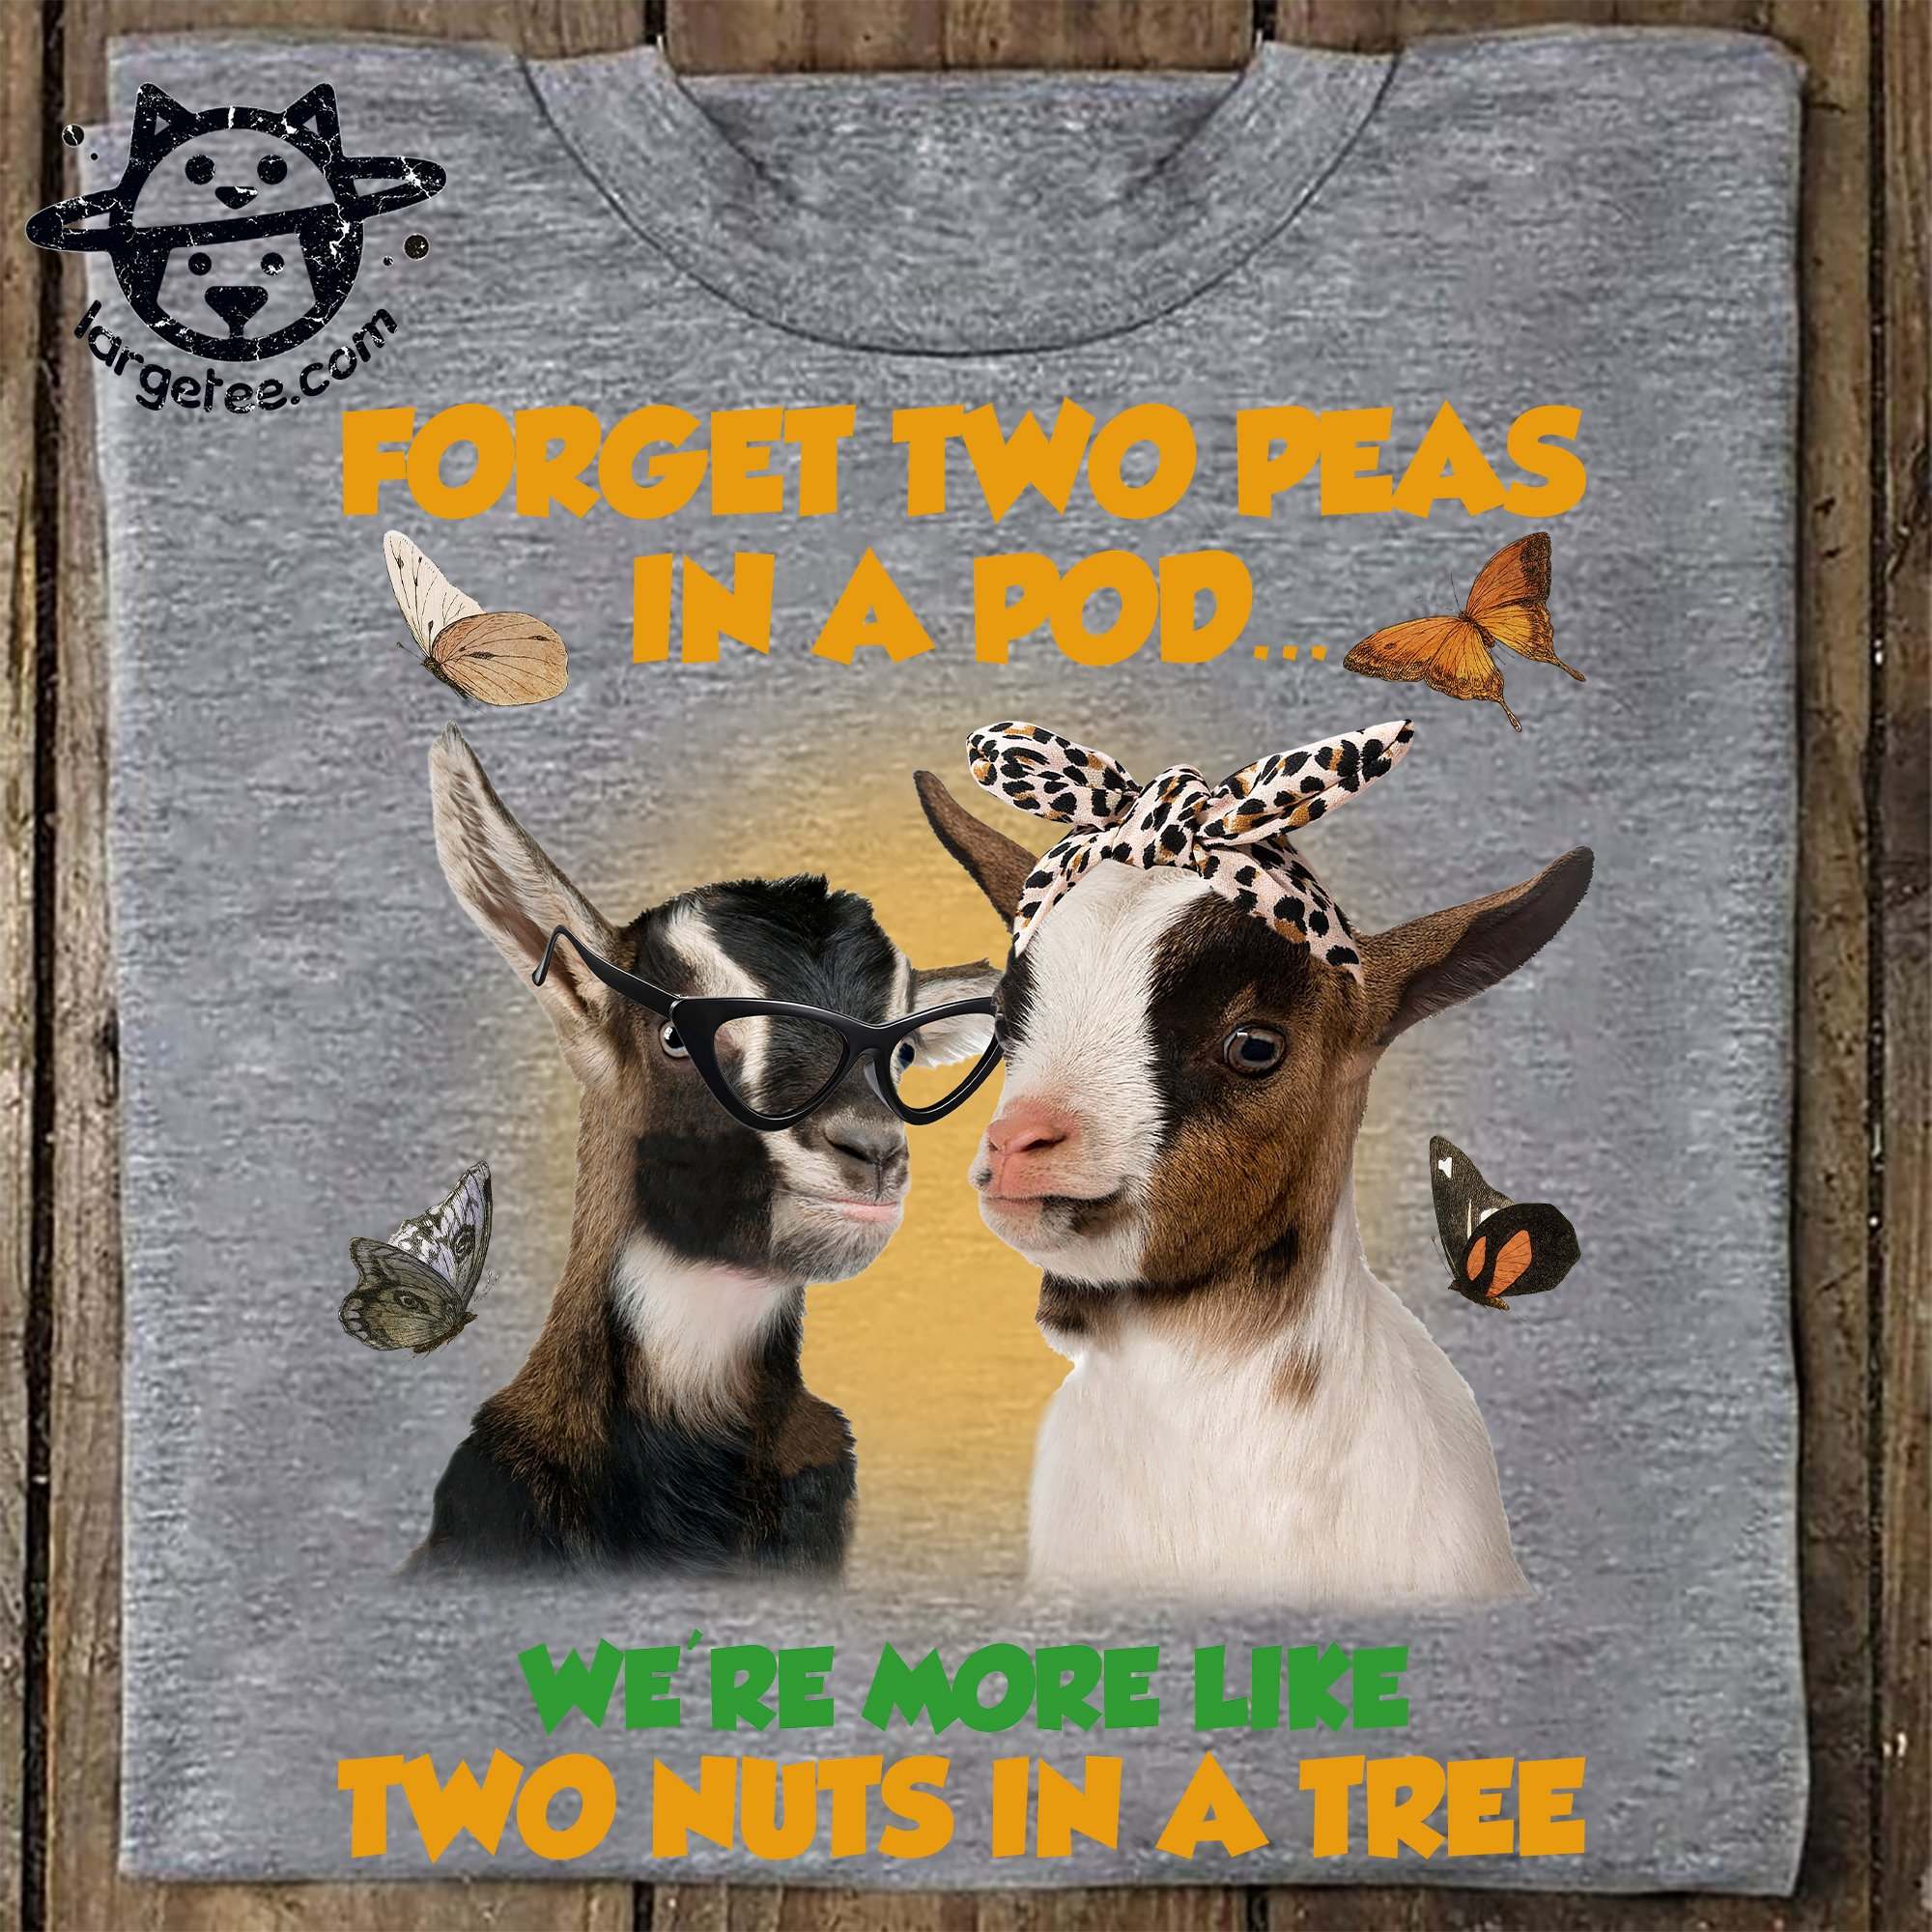 Forget two peas in a pod we're more like two nuts in a tree - Goat lover